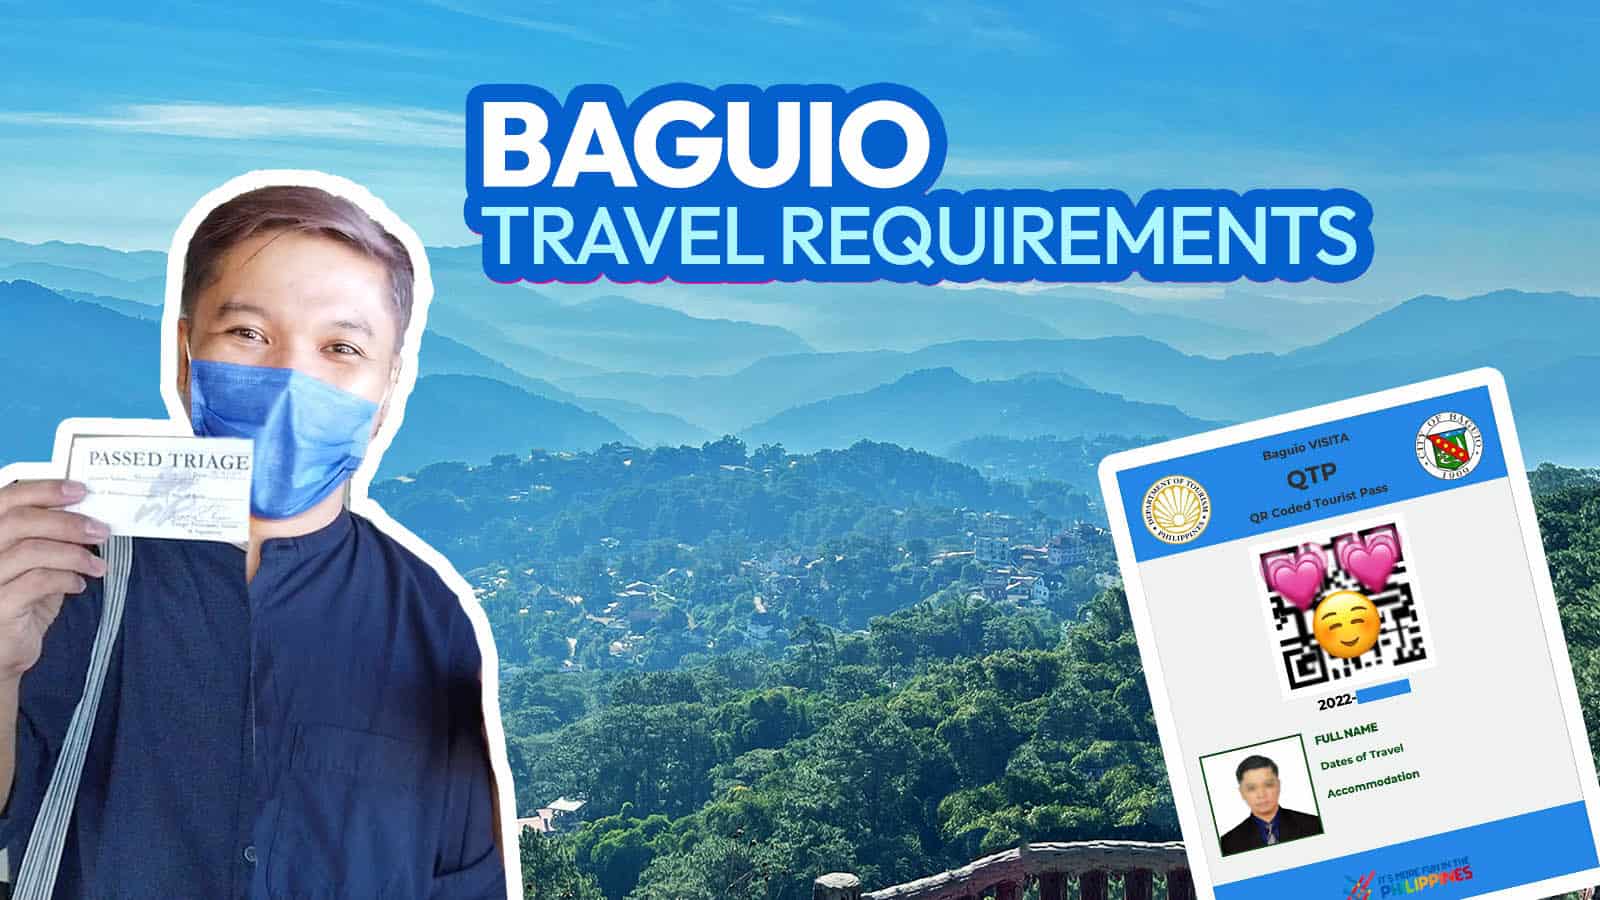 BAGUIO TRAVEL REQUIREMENTS for TOURISTS